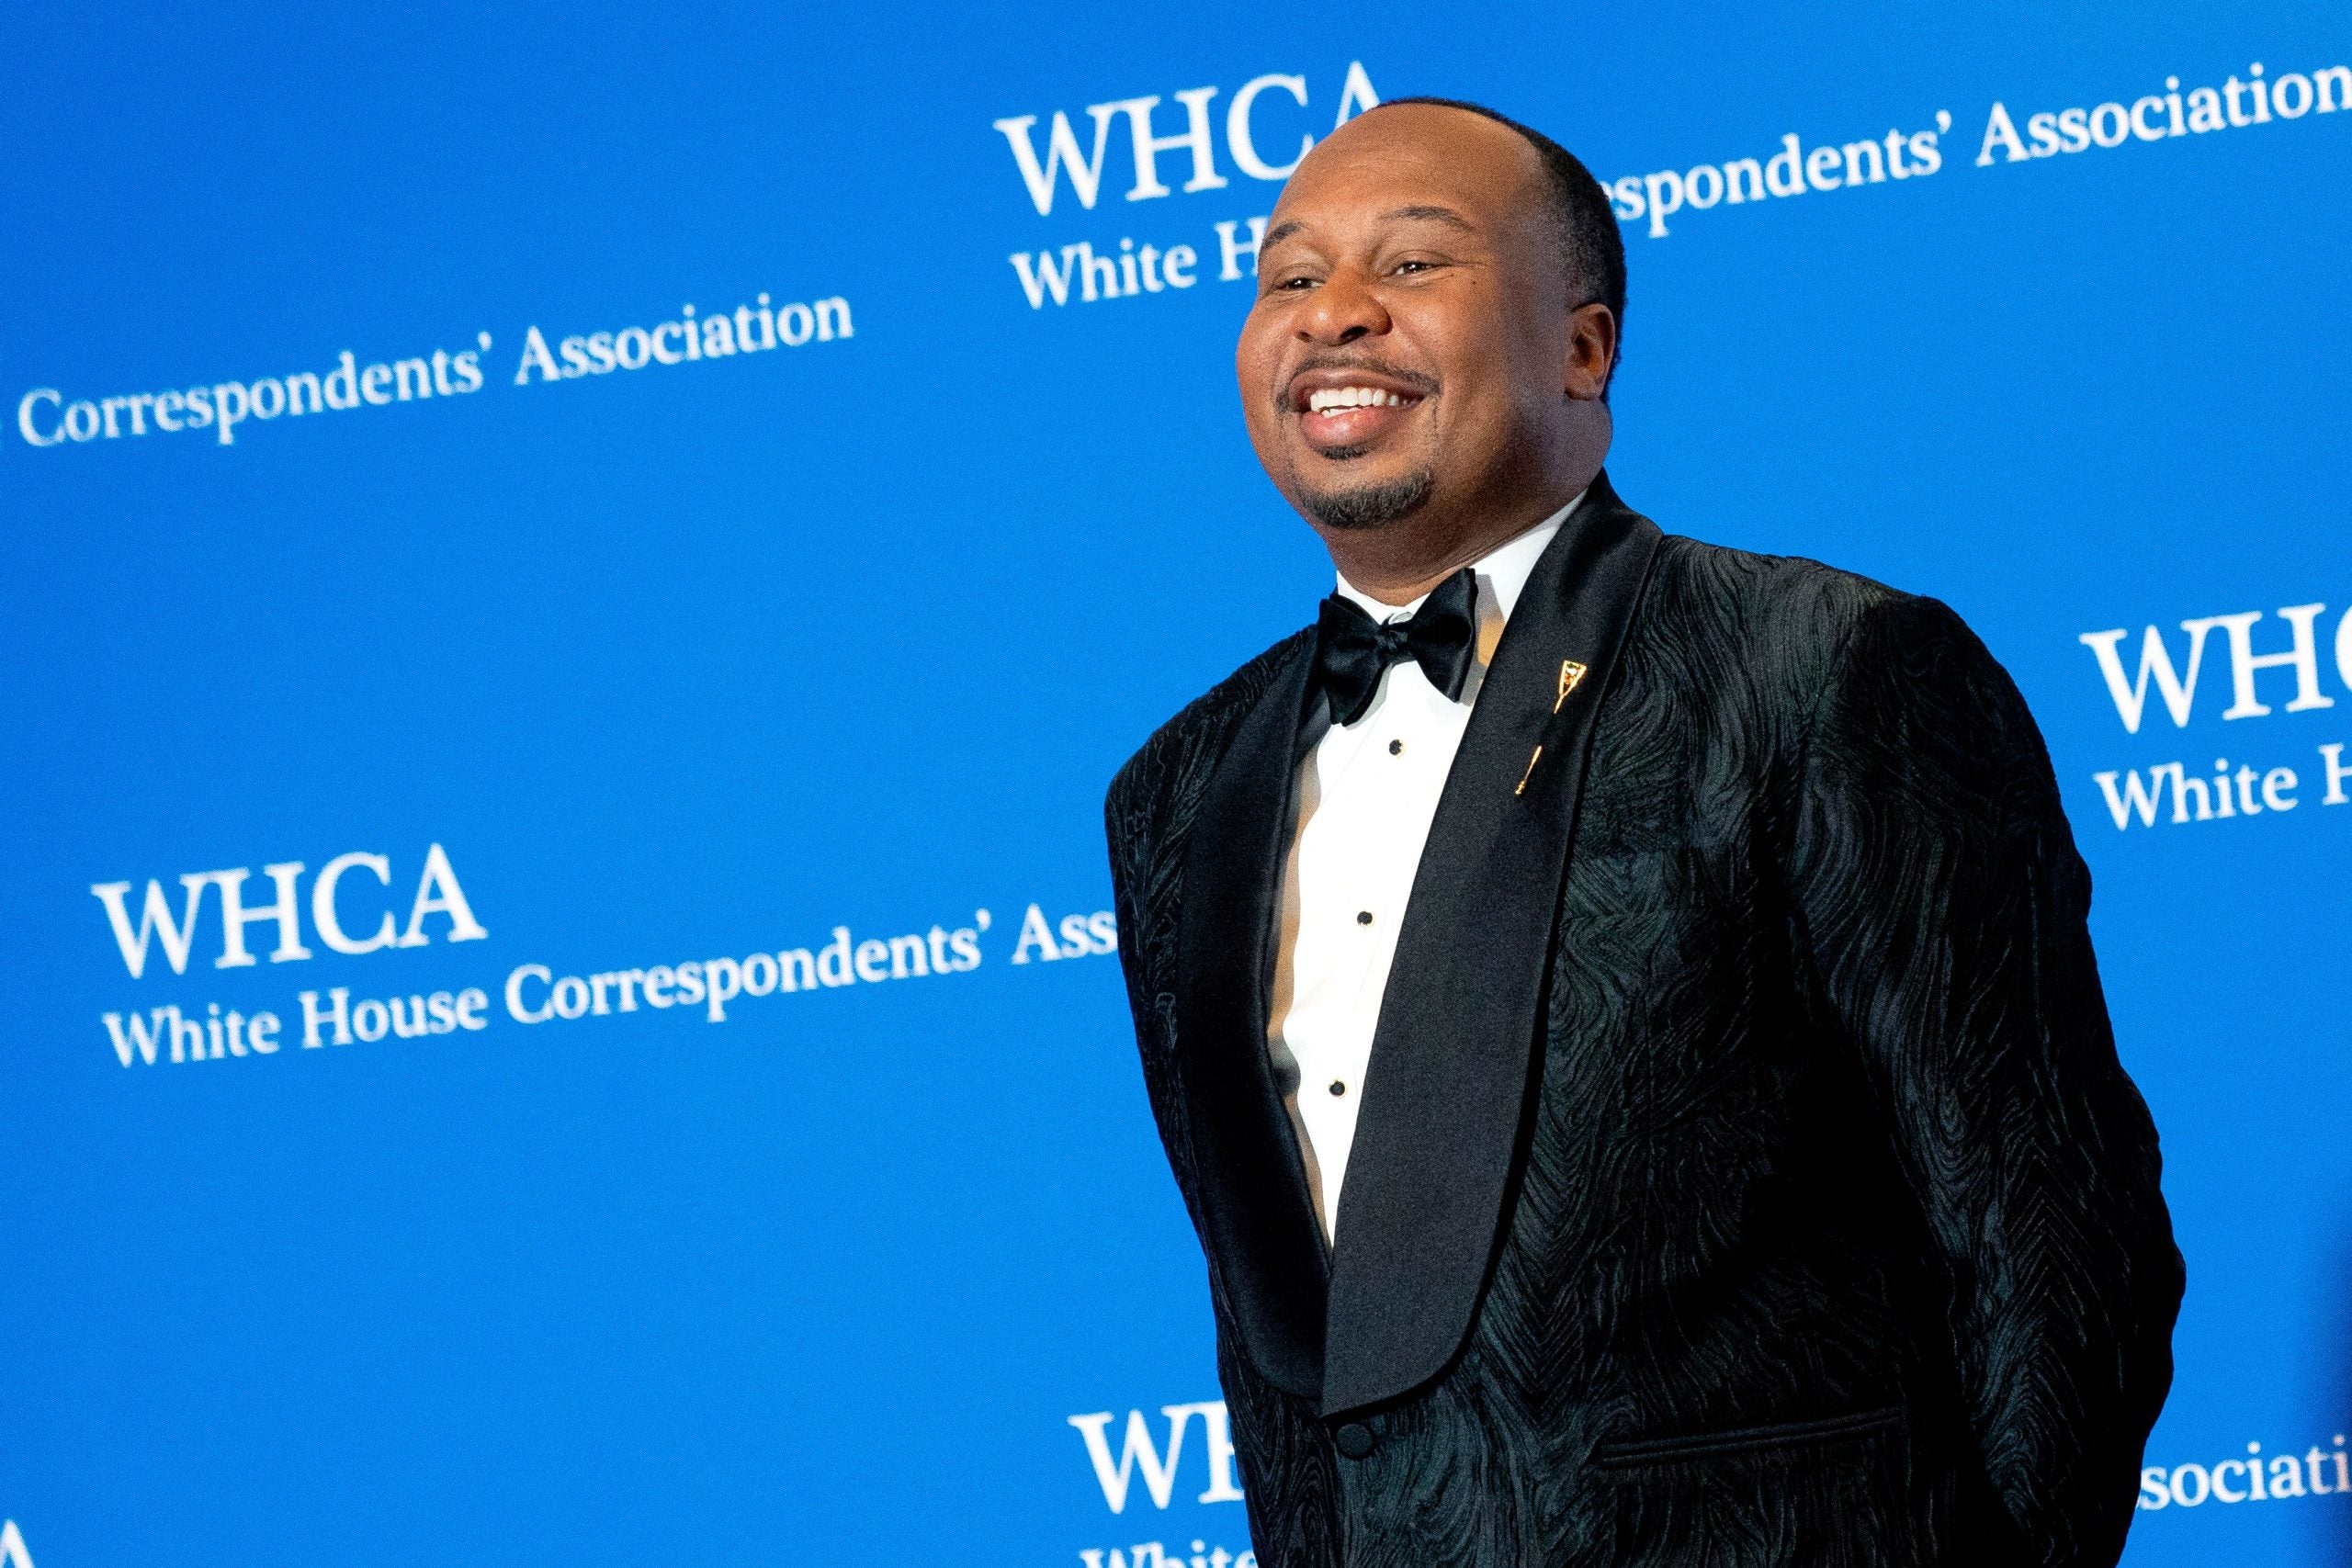 Roy Wood, Jr. On Giving Voice To The Masses At The White House Correspondents’ Dinner